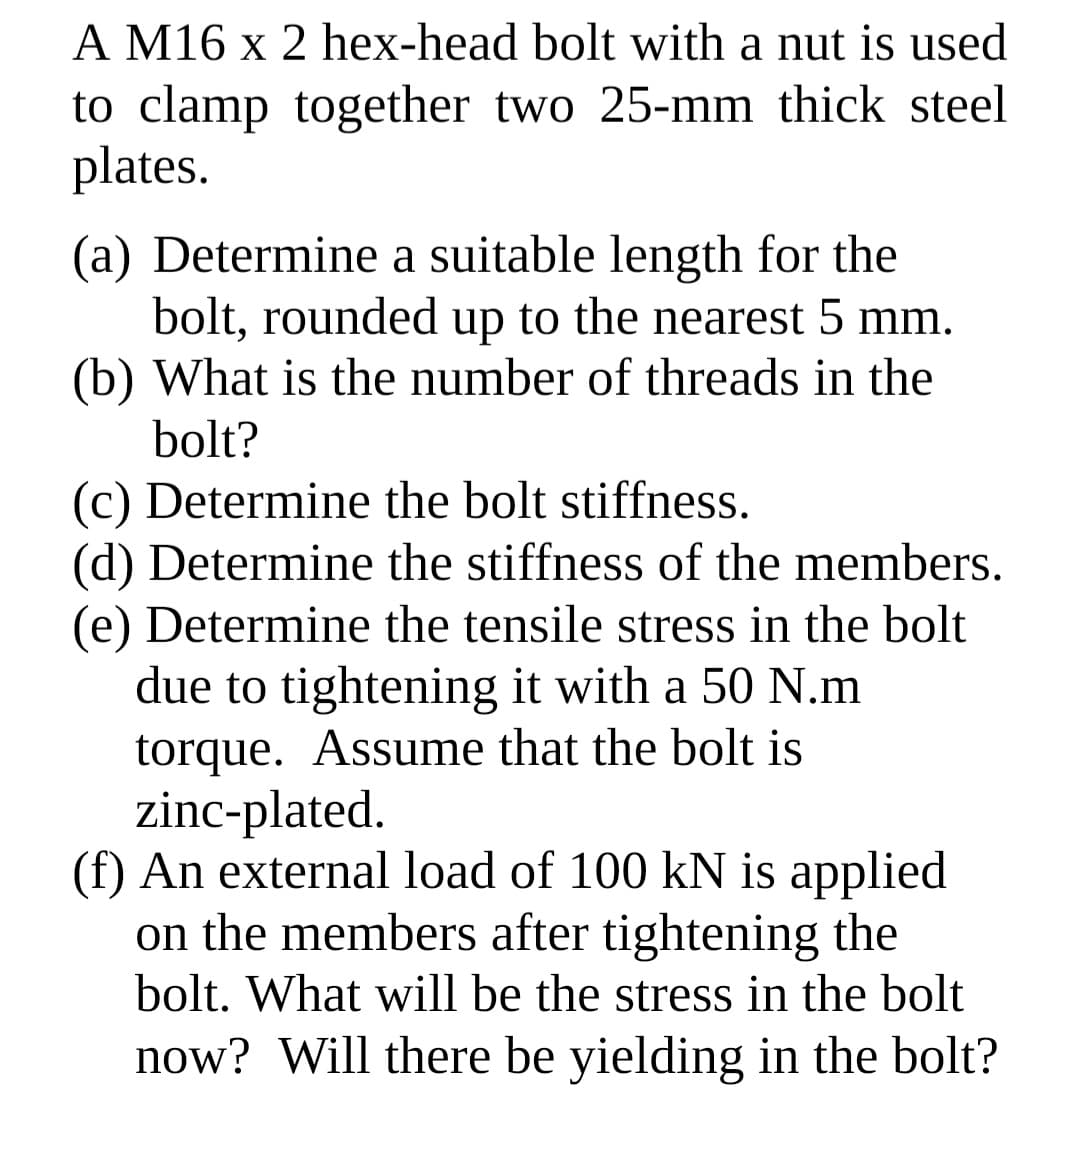 A M16 x 2 hex-head bolt with a nut is used
to clamp together two 25-mm thick steel
plates.
(a) Determine a suitable length for the
bolt, rounded up to the nearest 5 mm.
(b) What is the number of threads in the
bolt?
(c) Determine the bolt stiffness.
(d) Determine the stiffness of the members.
(e) Determine the tensile stress in the bolt
due to tightening it with a 50 N.m
torque. Assume that the bolt is
zinc-plated.
(f) An external load of 100 kN is applied
on the members after tightening the
bolt. What will be the stress in the bolt
now? Will there be yielding in the bolt?
